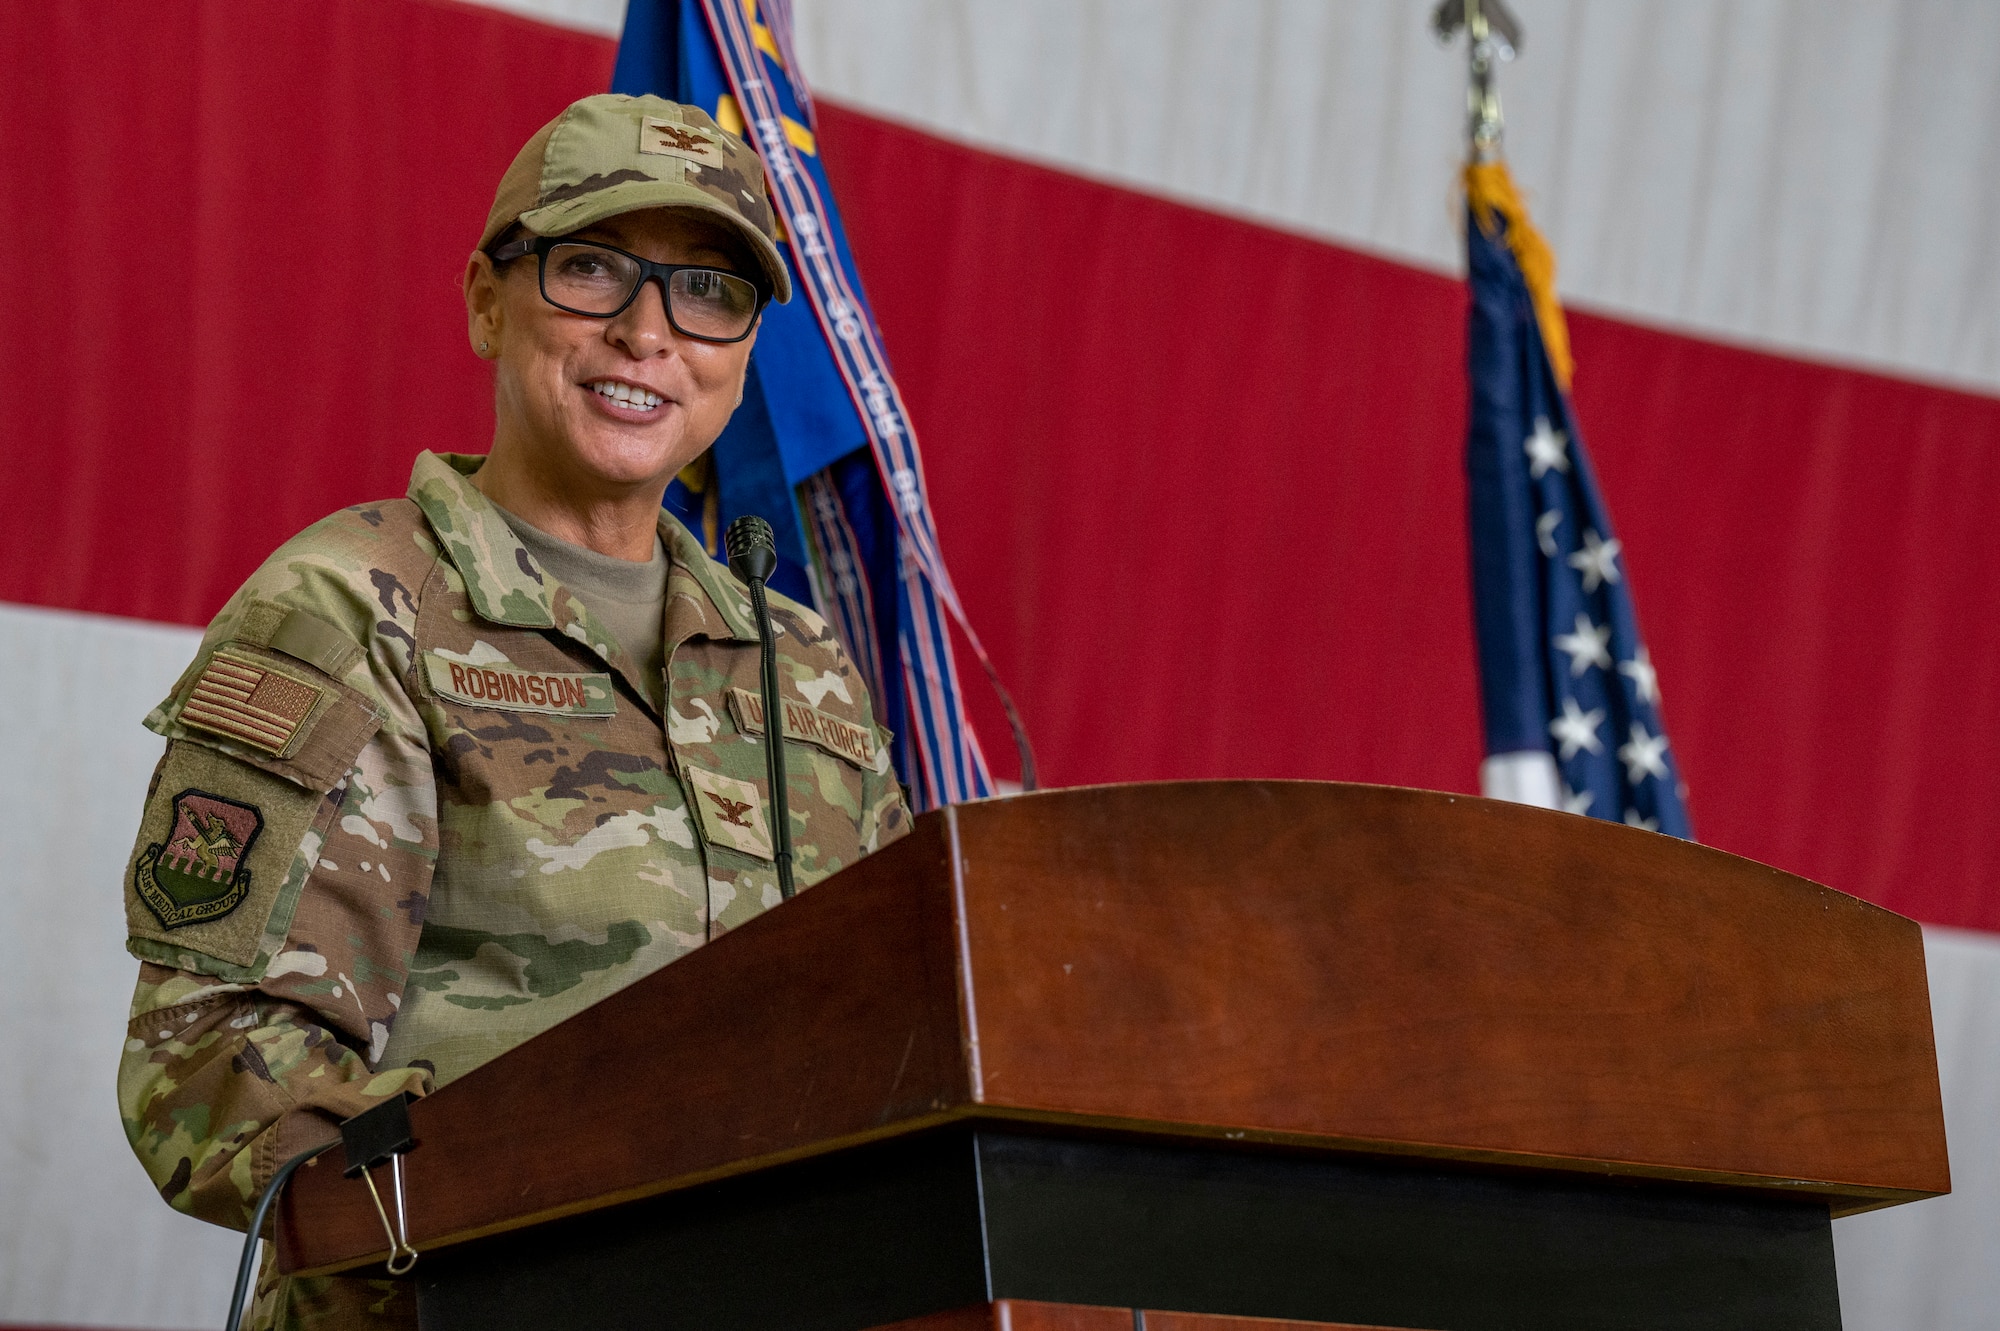 U.S. Air Force Col. Mocha Robinson, 51st Medical Group incoming commander, gives her first speech to her group during a change of command ceremony at Osan Air Base, Republic of Korea, July 12, 2023. Change of command ceremonies are time-honored traditions deeply-rooted in American military history. (U.S. Air Force photo by Senior Airman Aaron Edwards)